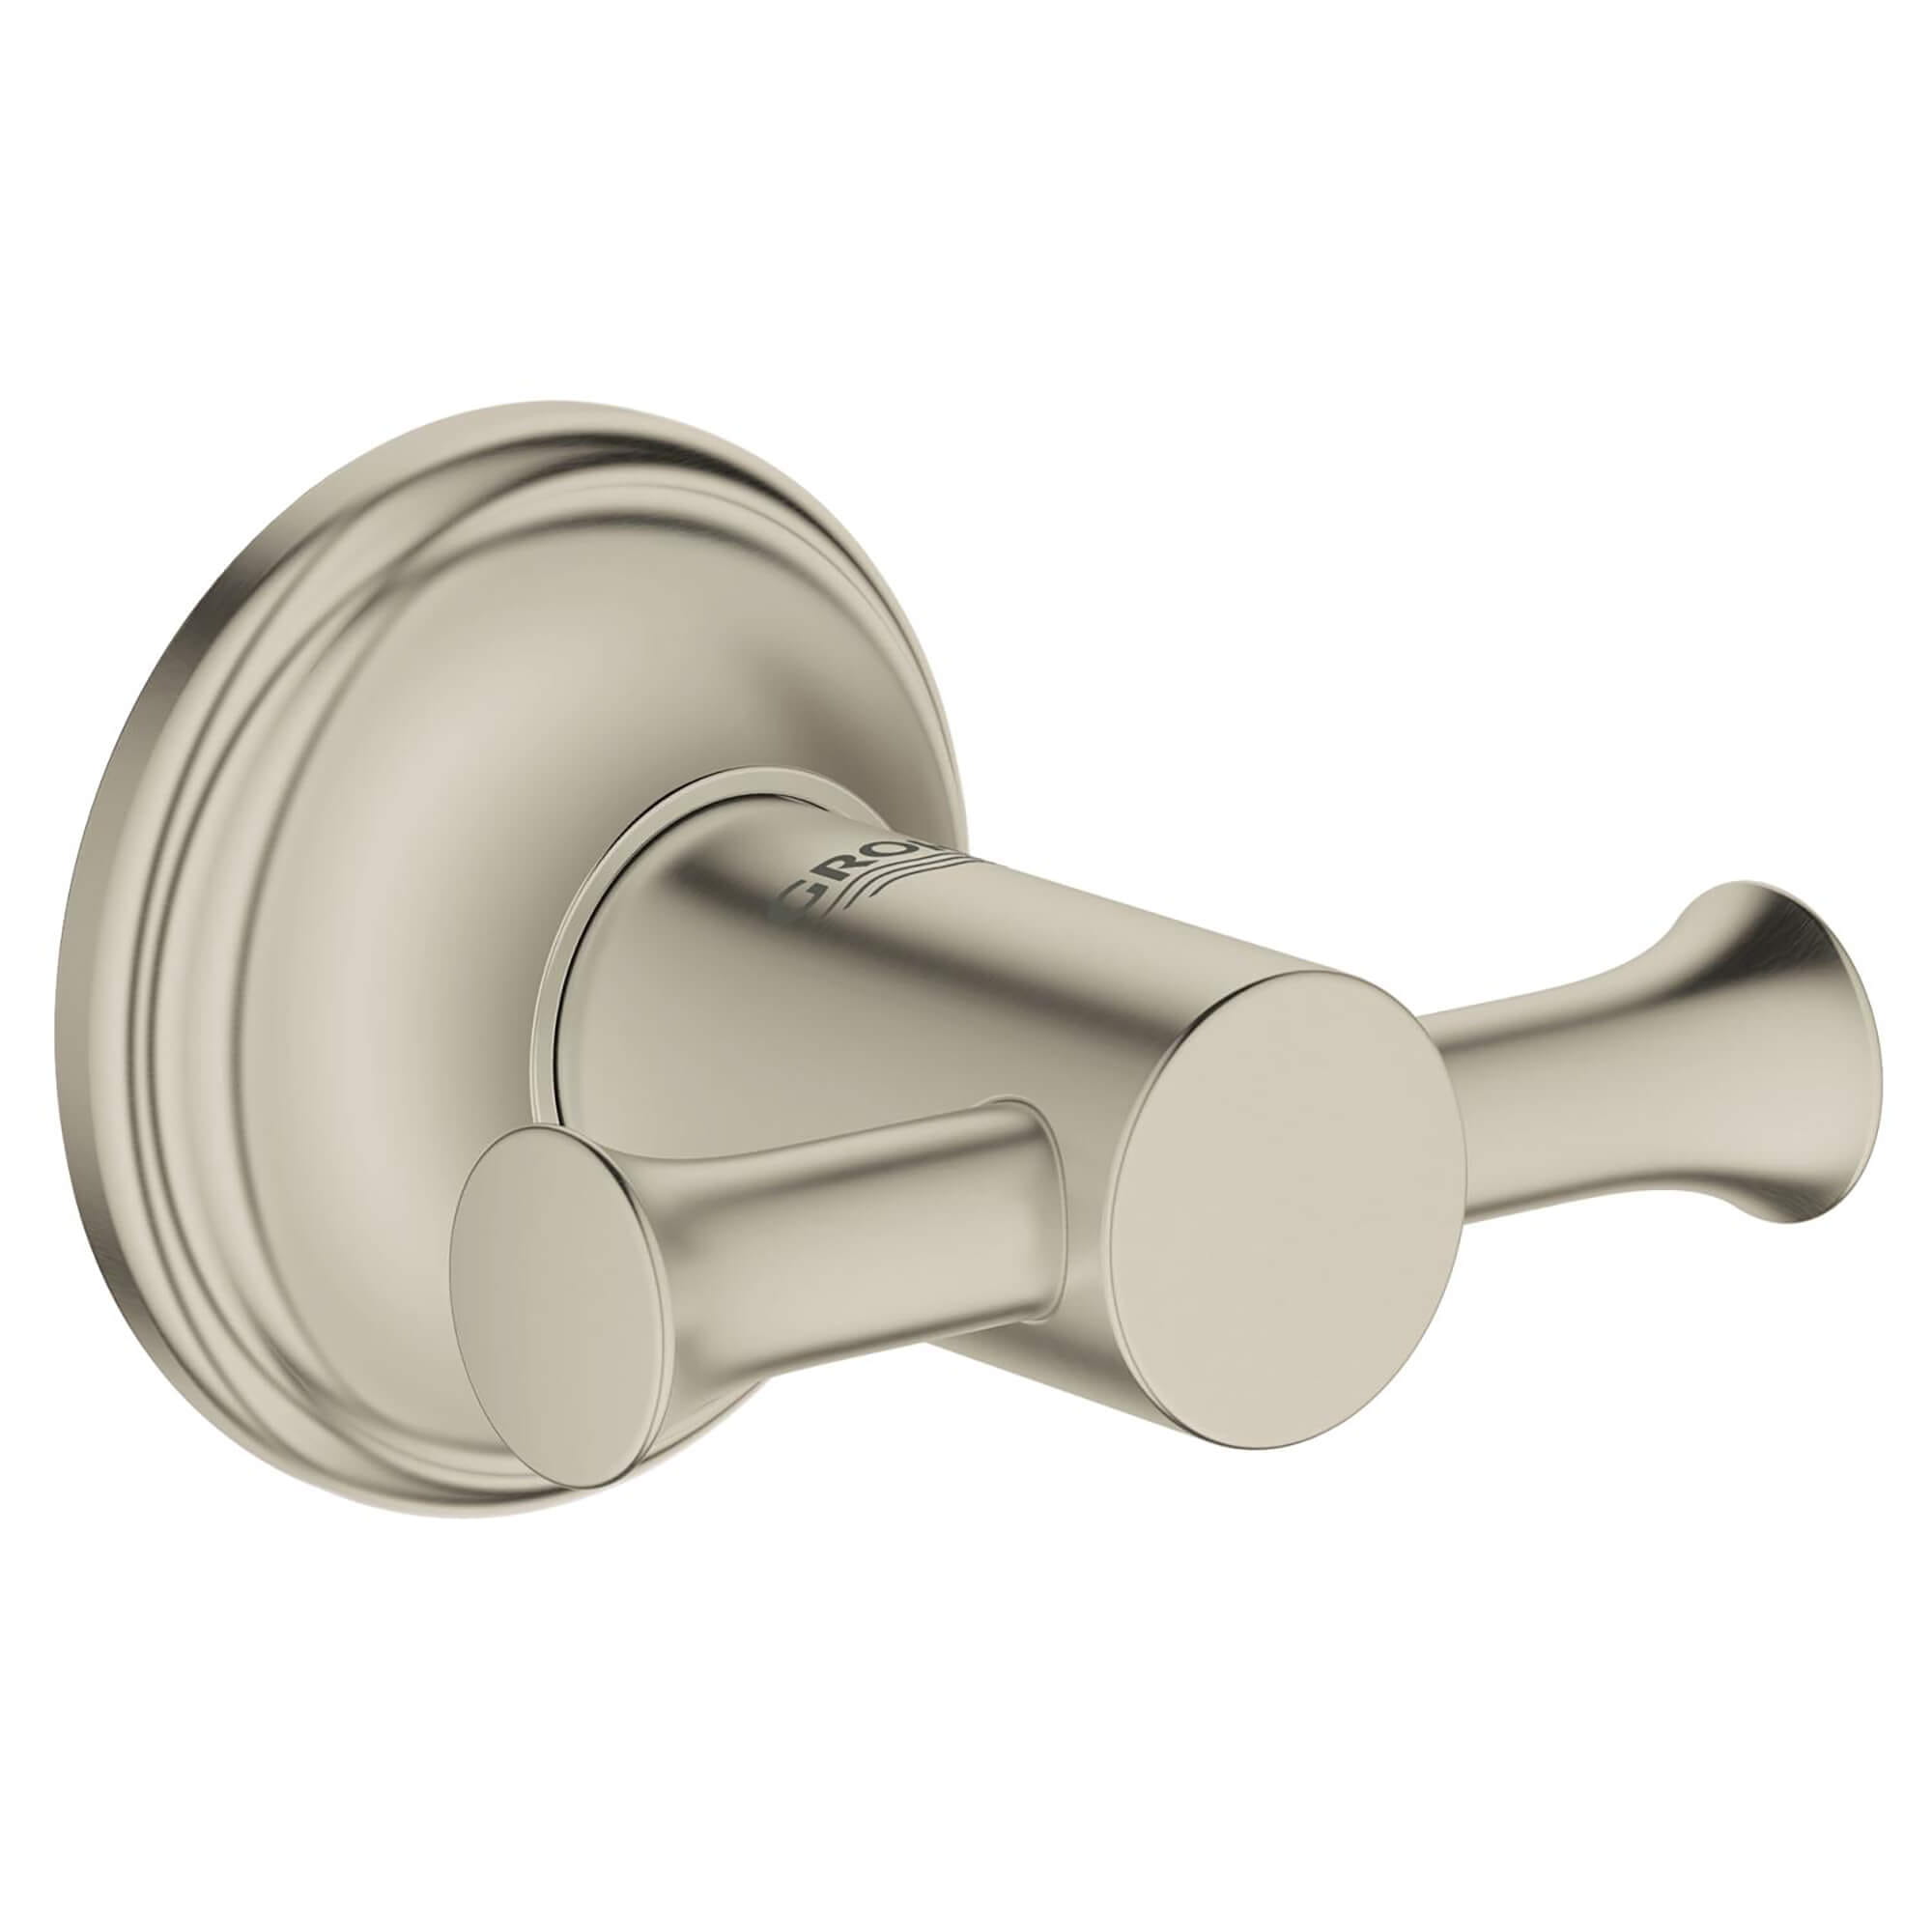 Essentials Authentic Hook GROHE BRUSHED NICKEL